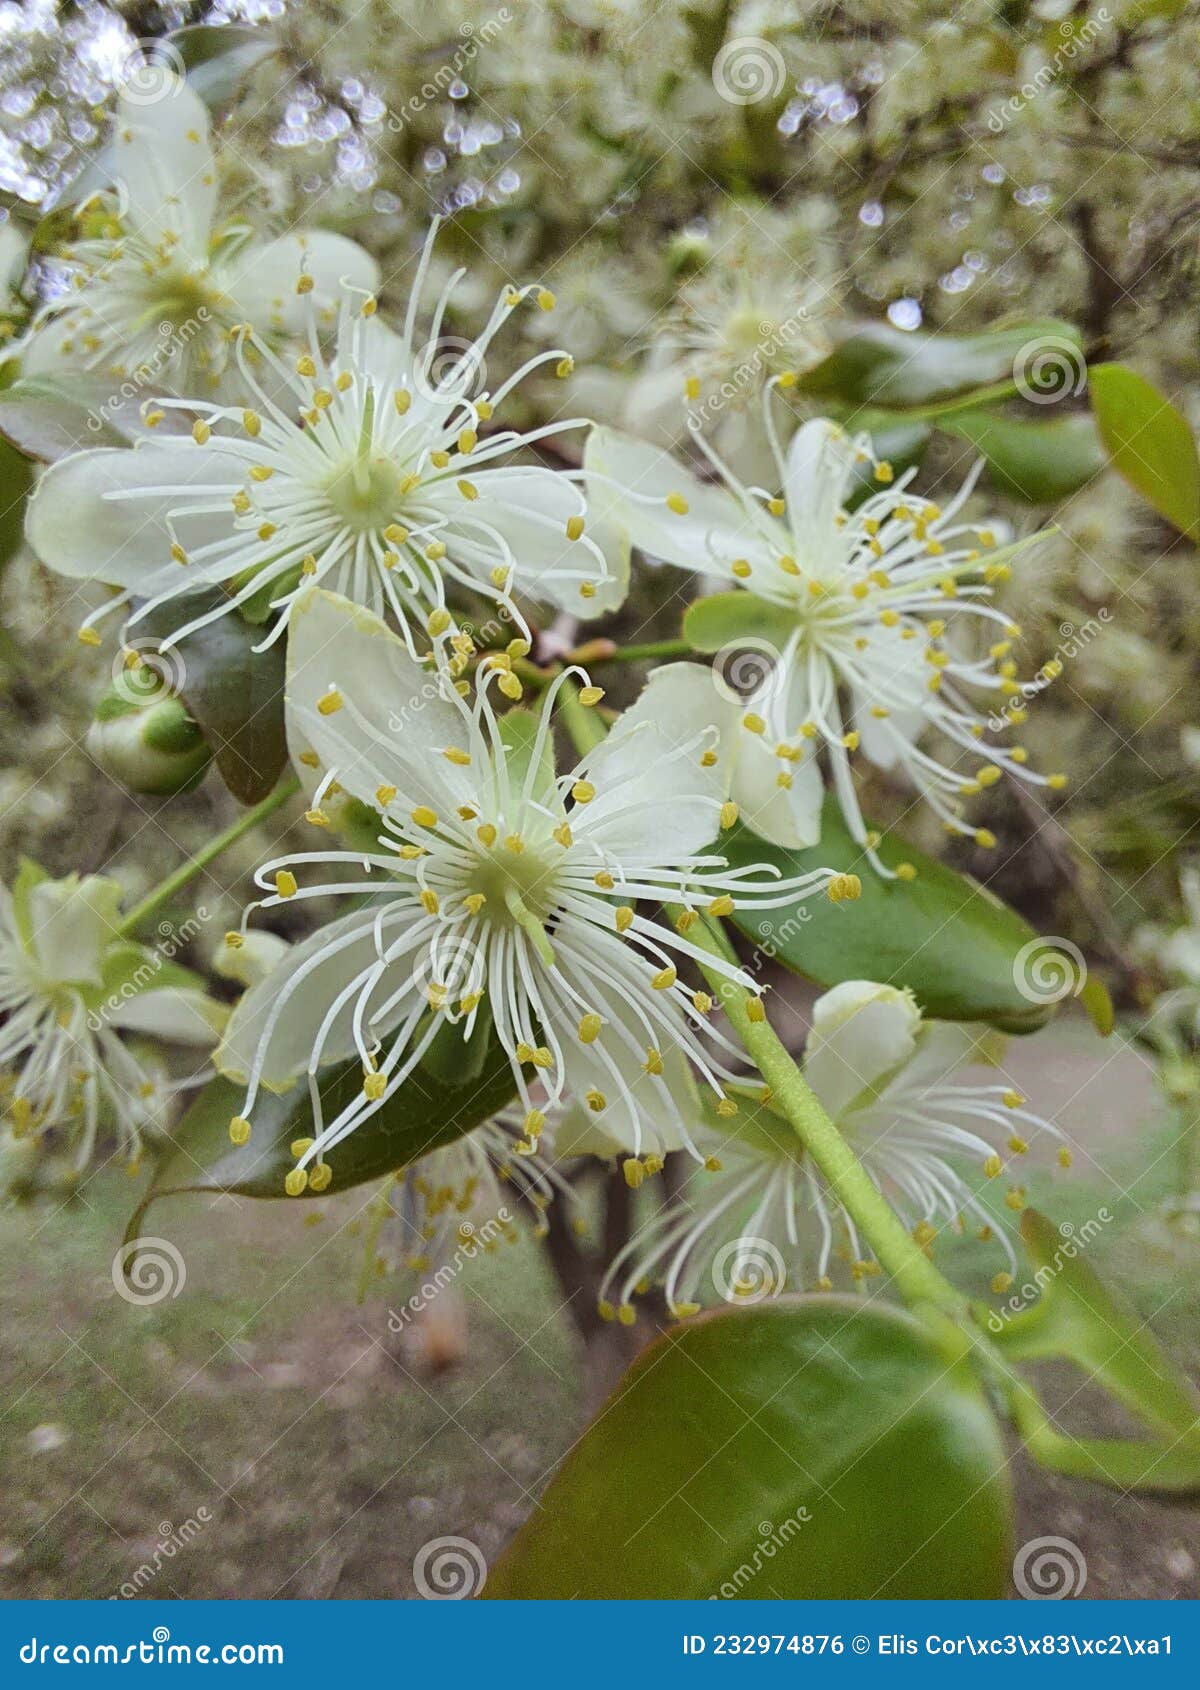 close-up of a surinamese or pitanga cherry blossom in a garden